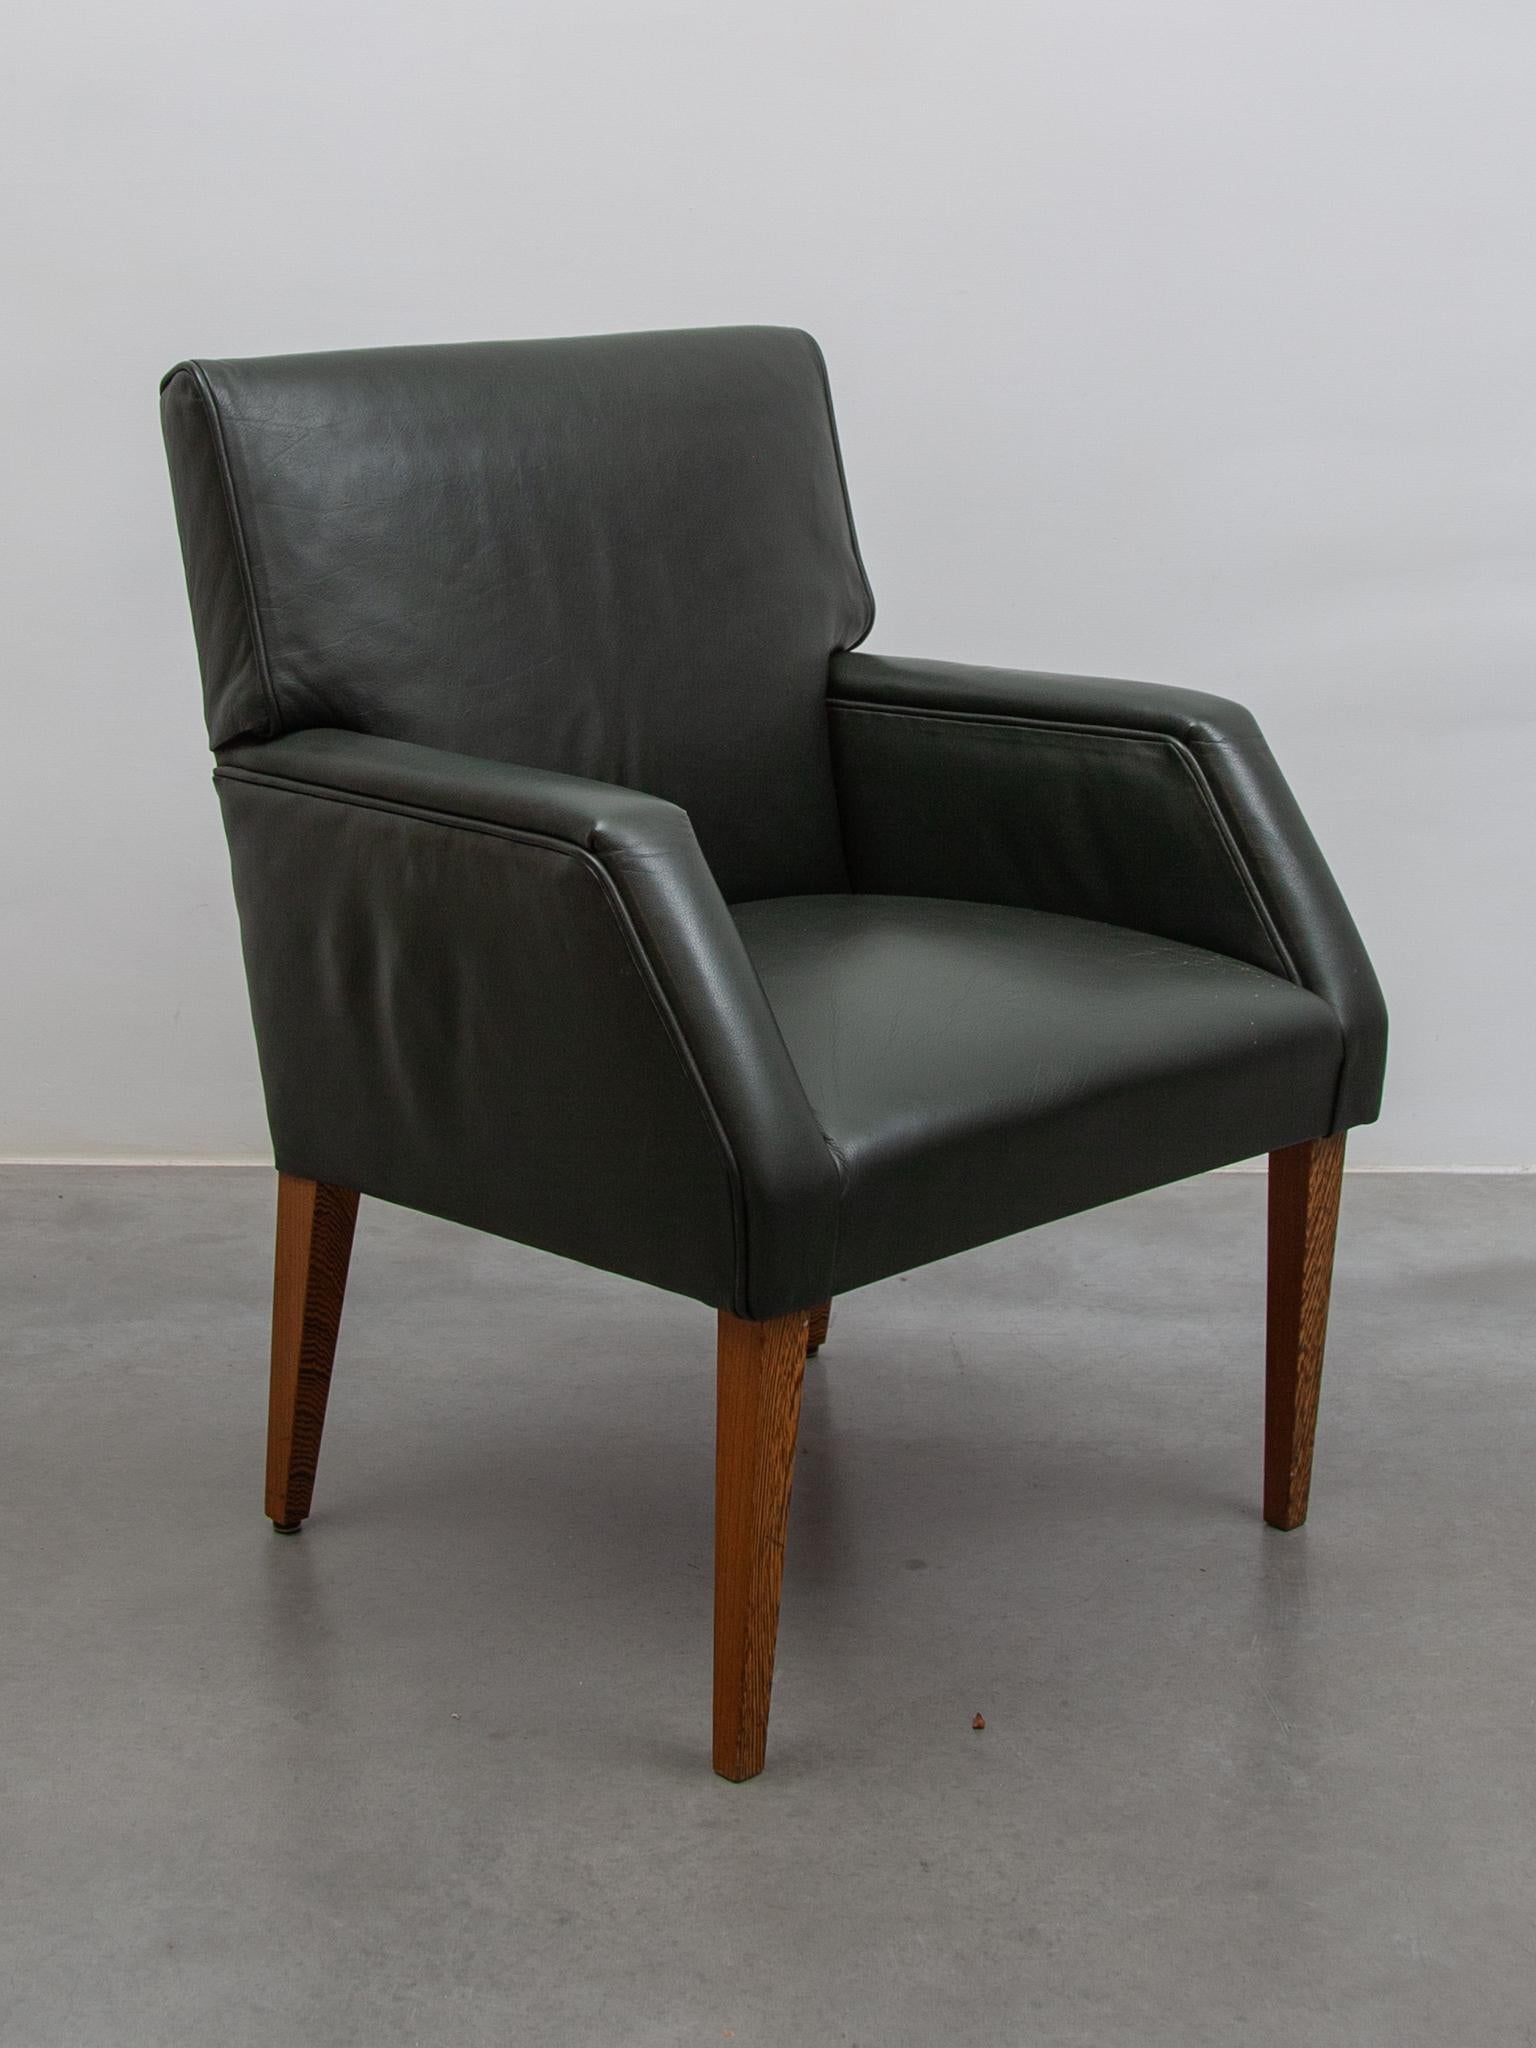 Set of Four Green Leather Arm Lounge Chairs, Denmark In Good Condition For Sale In Antwerp, BE